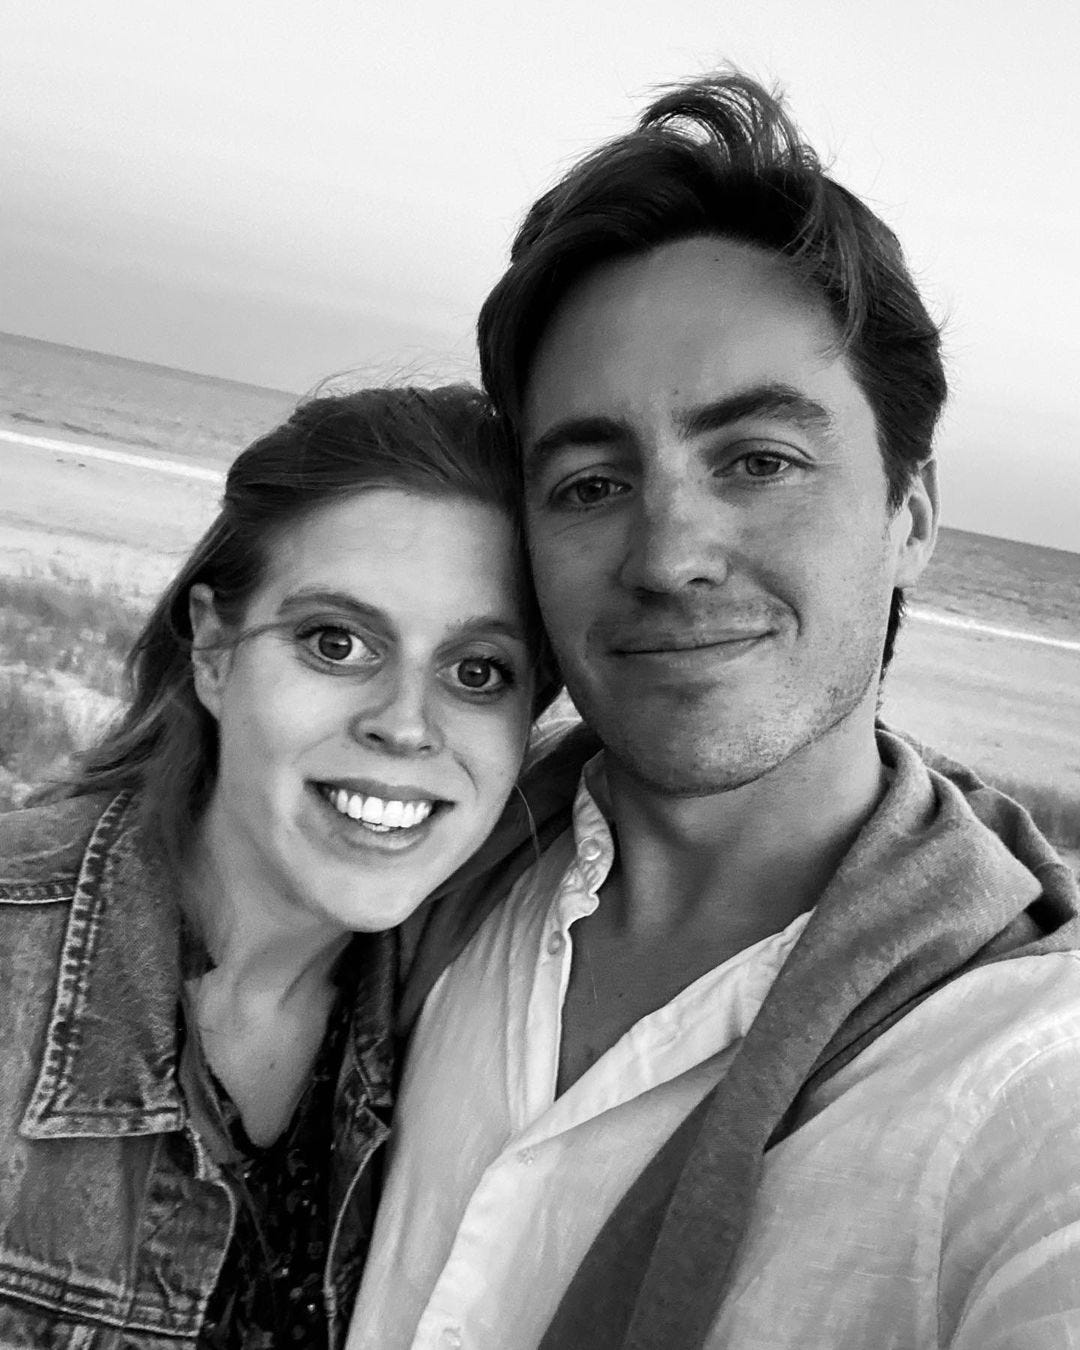 Edoardo and Princess Beatrice by the sea in black and white selfie